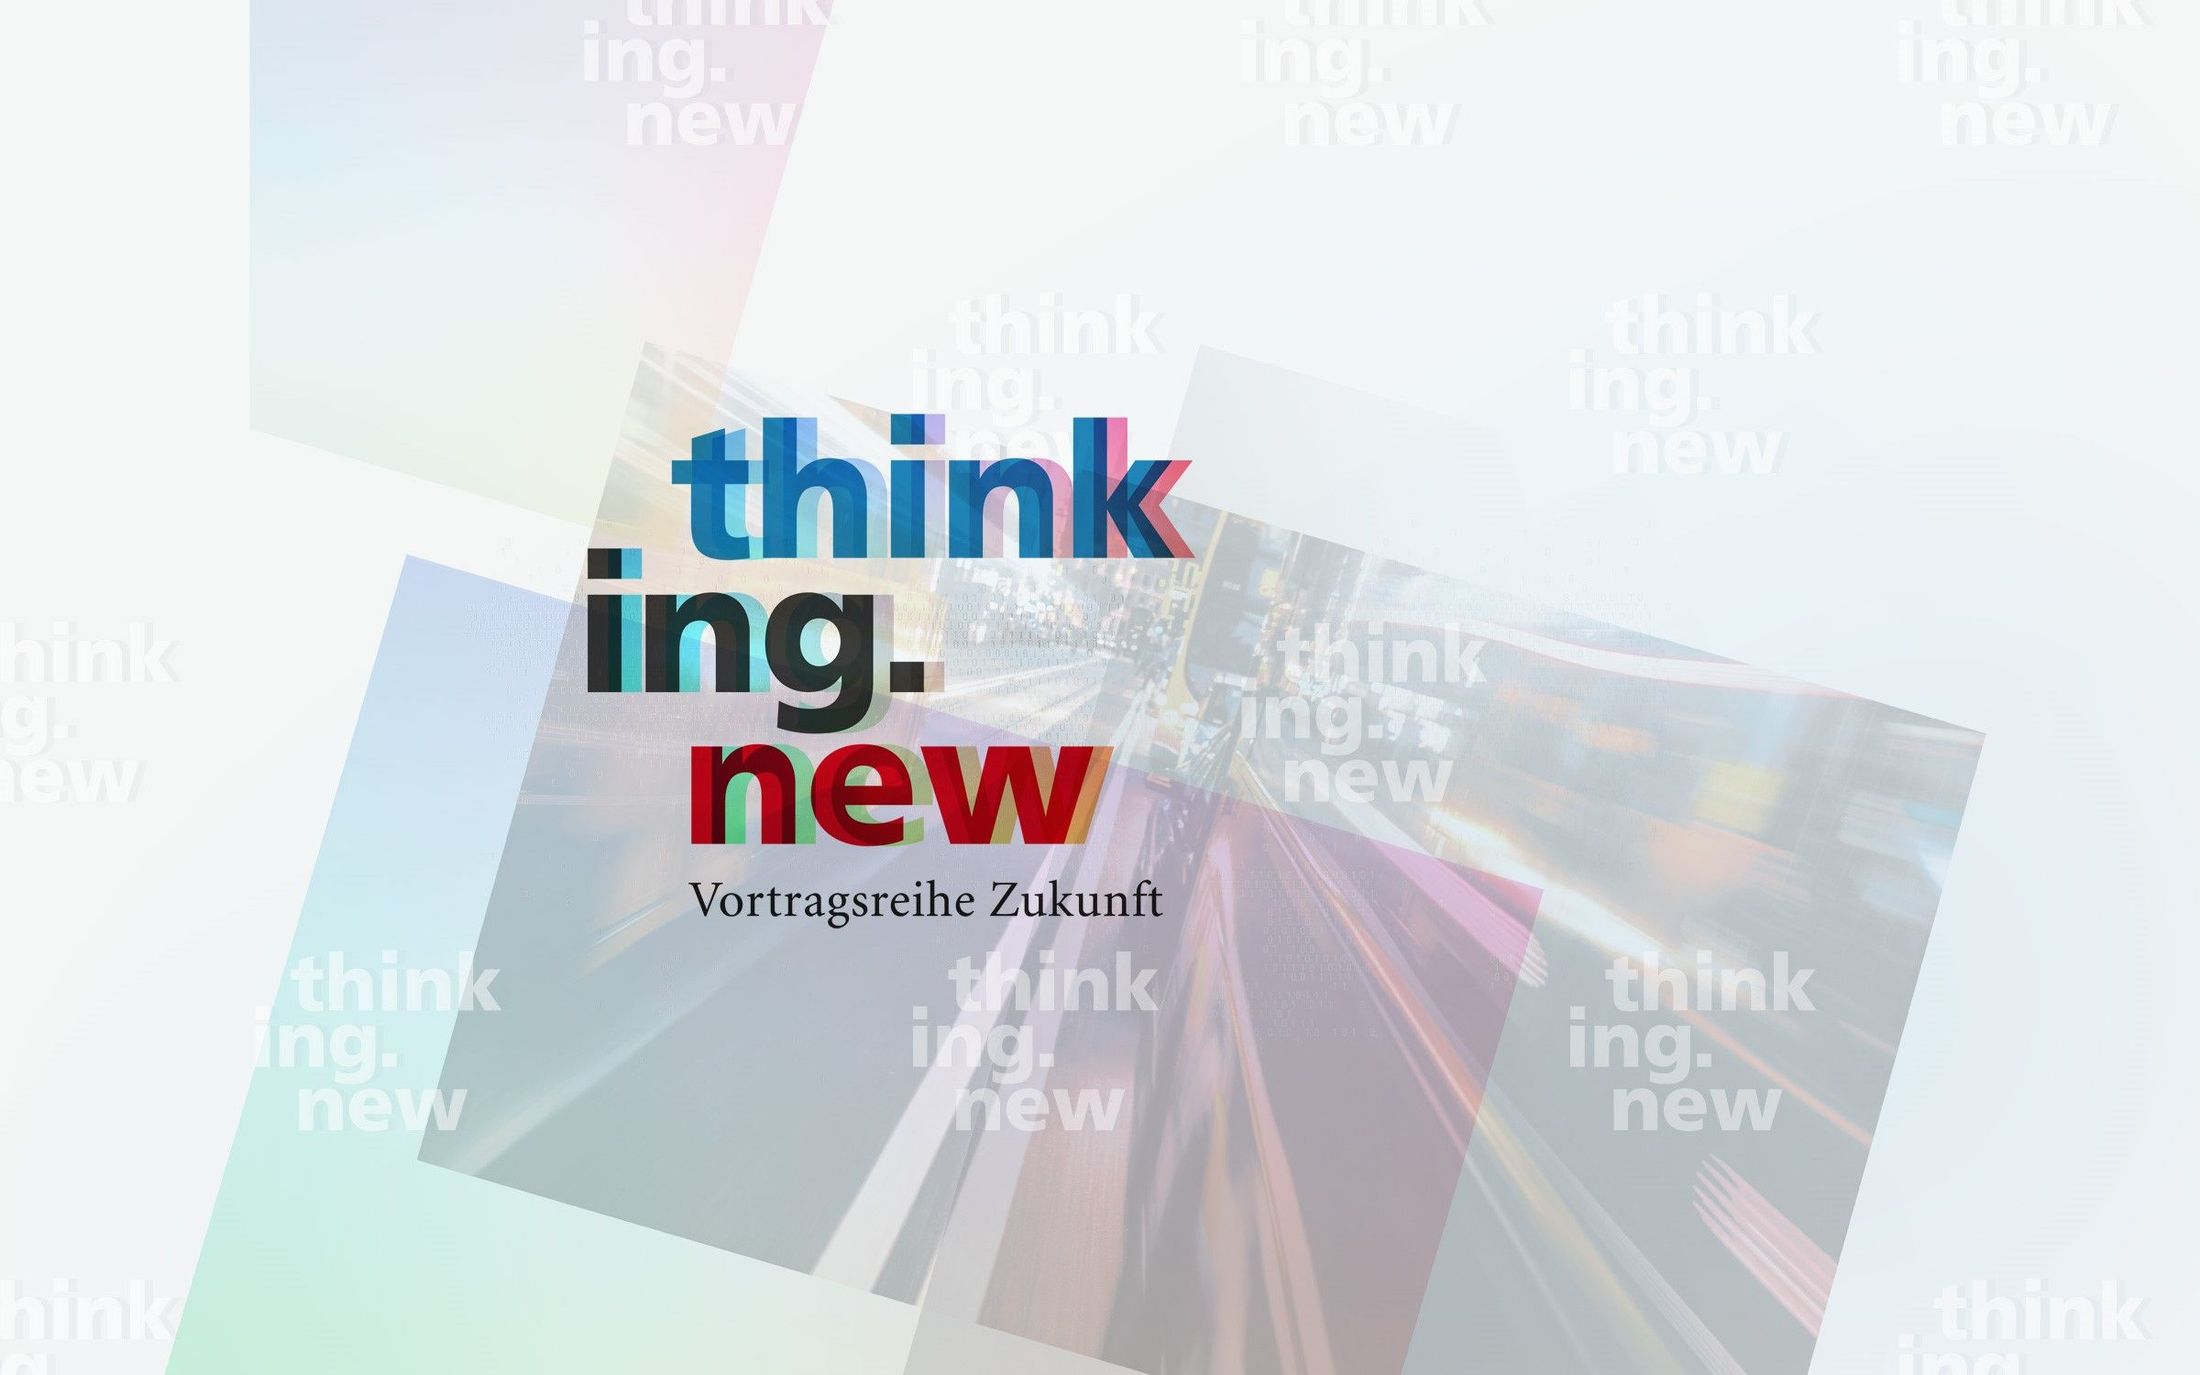 think ing. new